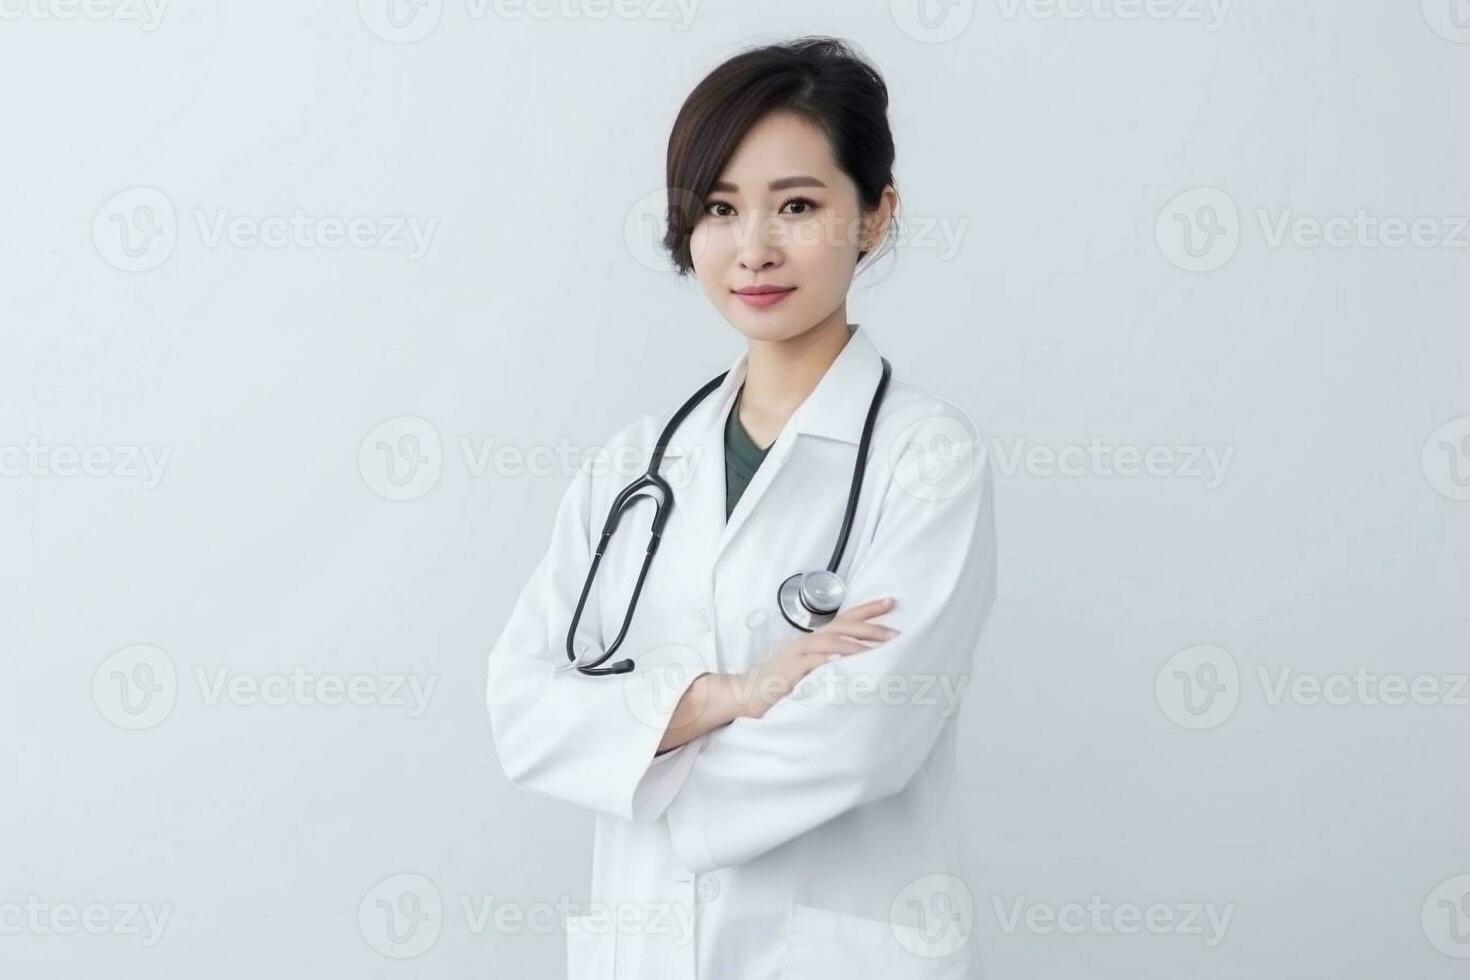 Portrait of a beautiful young girl doctor in a white coat. She looks friendly and smiles. White background. photo